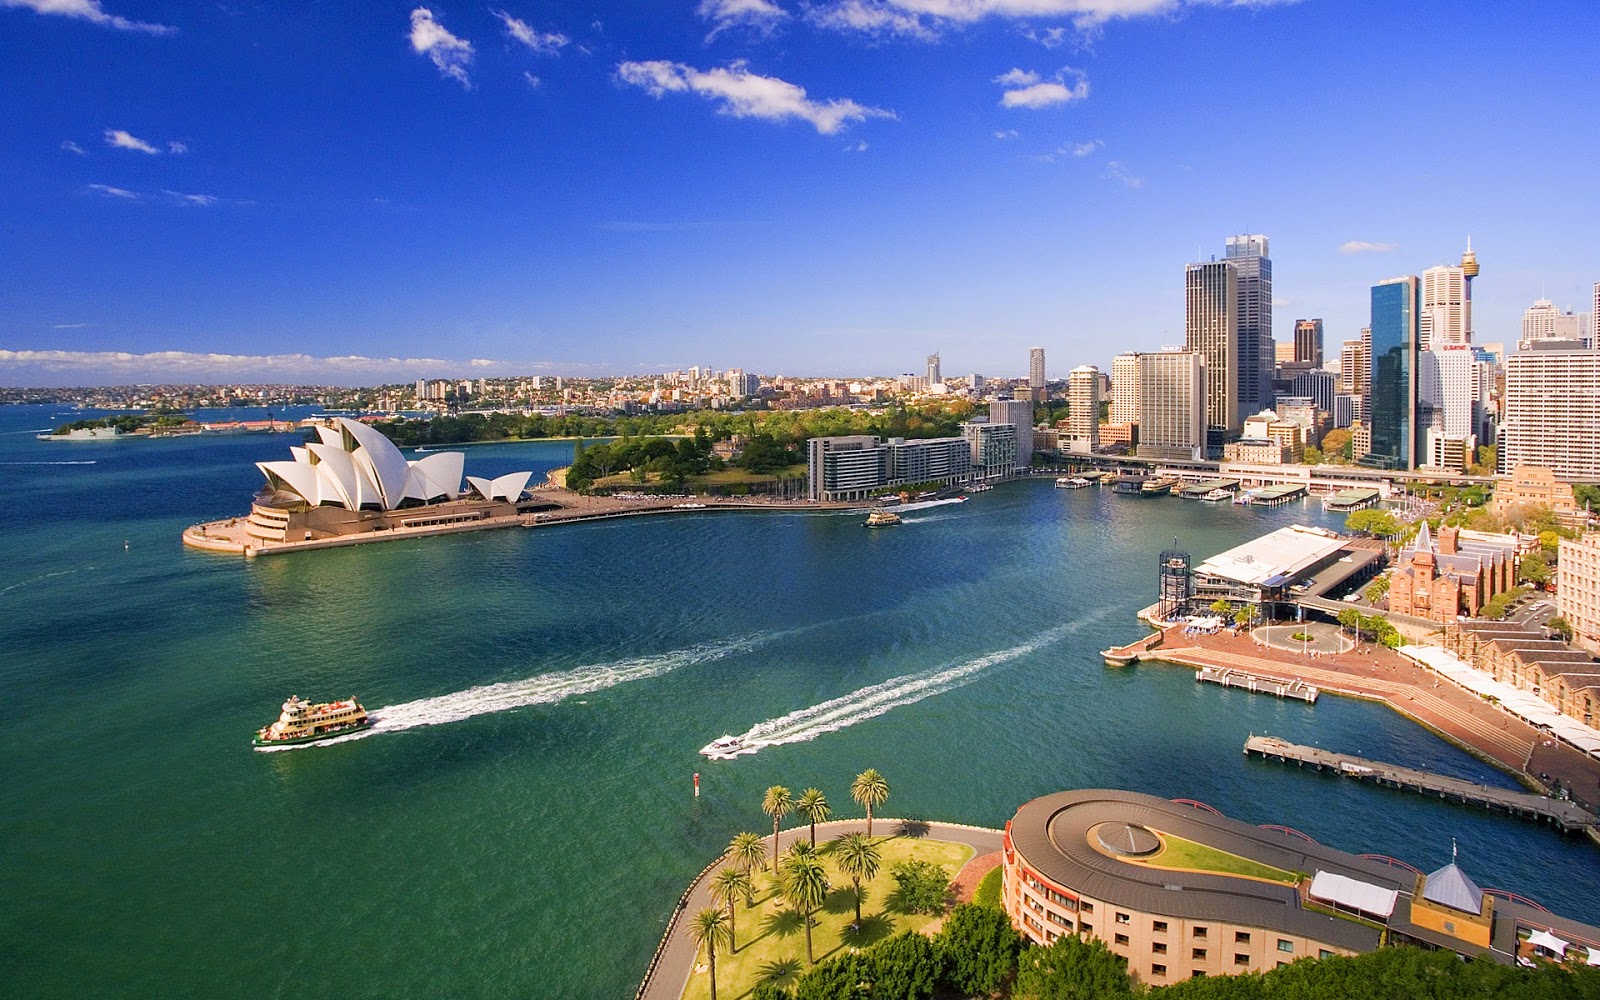 Australia 10 Most Beautiful Island Countries in the World